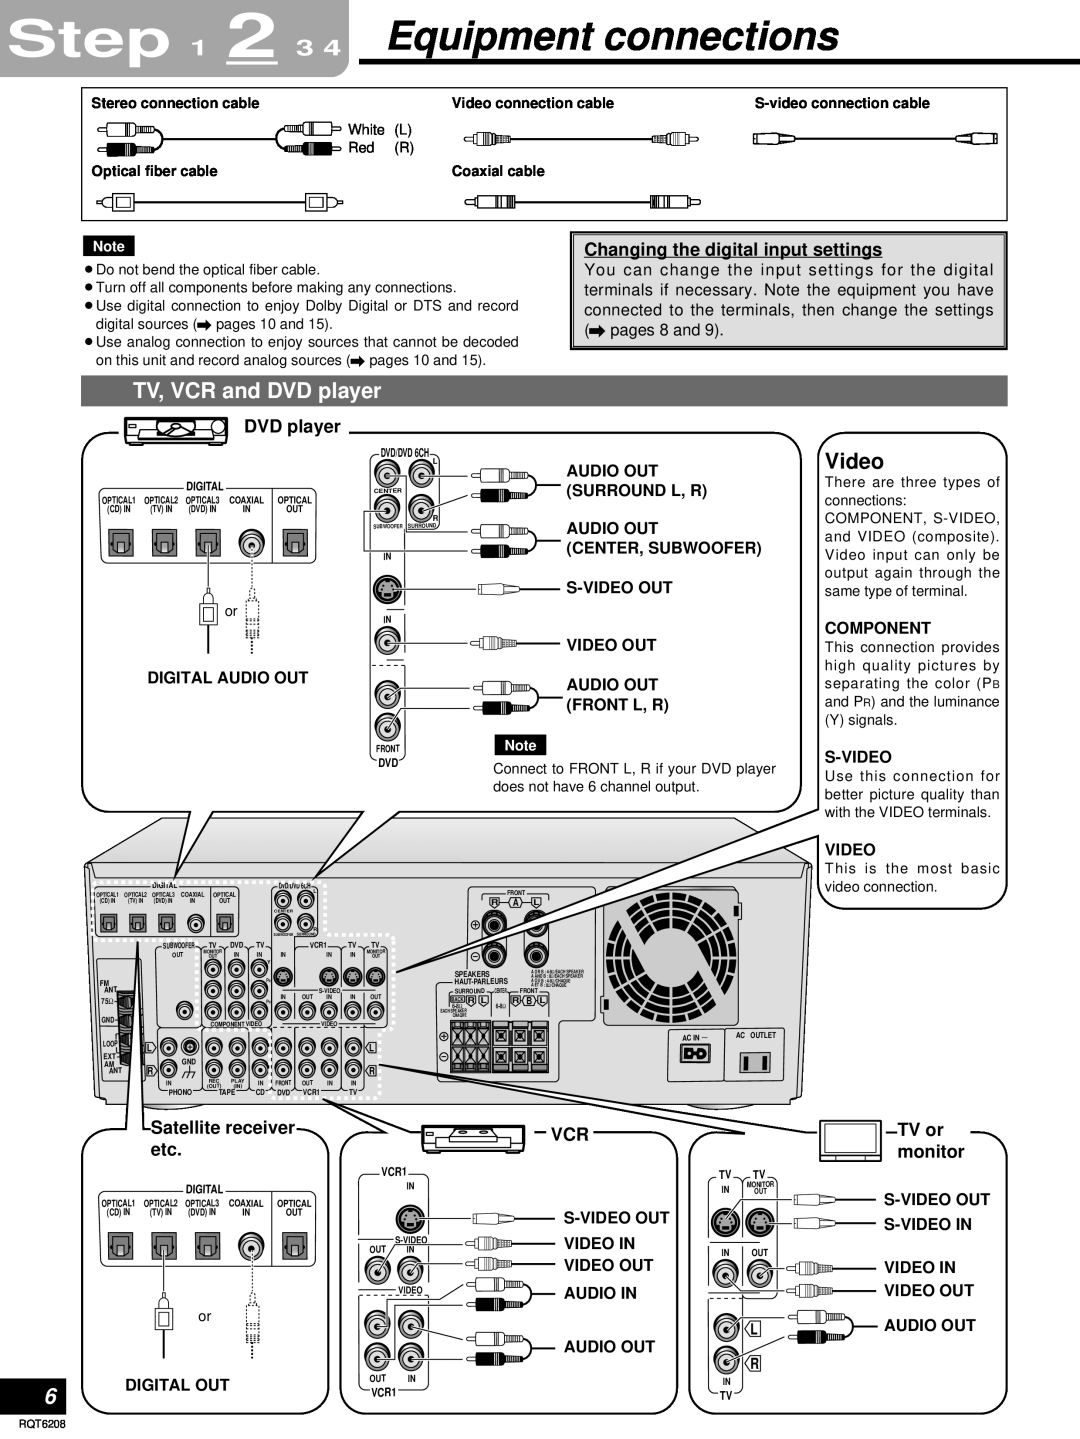 Panasonic SA-HE100 2 3 4 Equipment connections, TV, VCR and DVD player, Changing the digital input settings, TV or monitor 